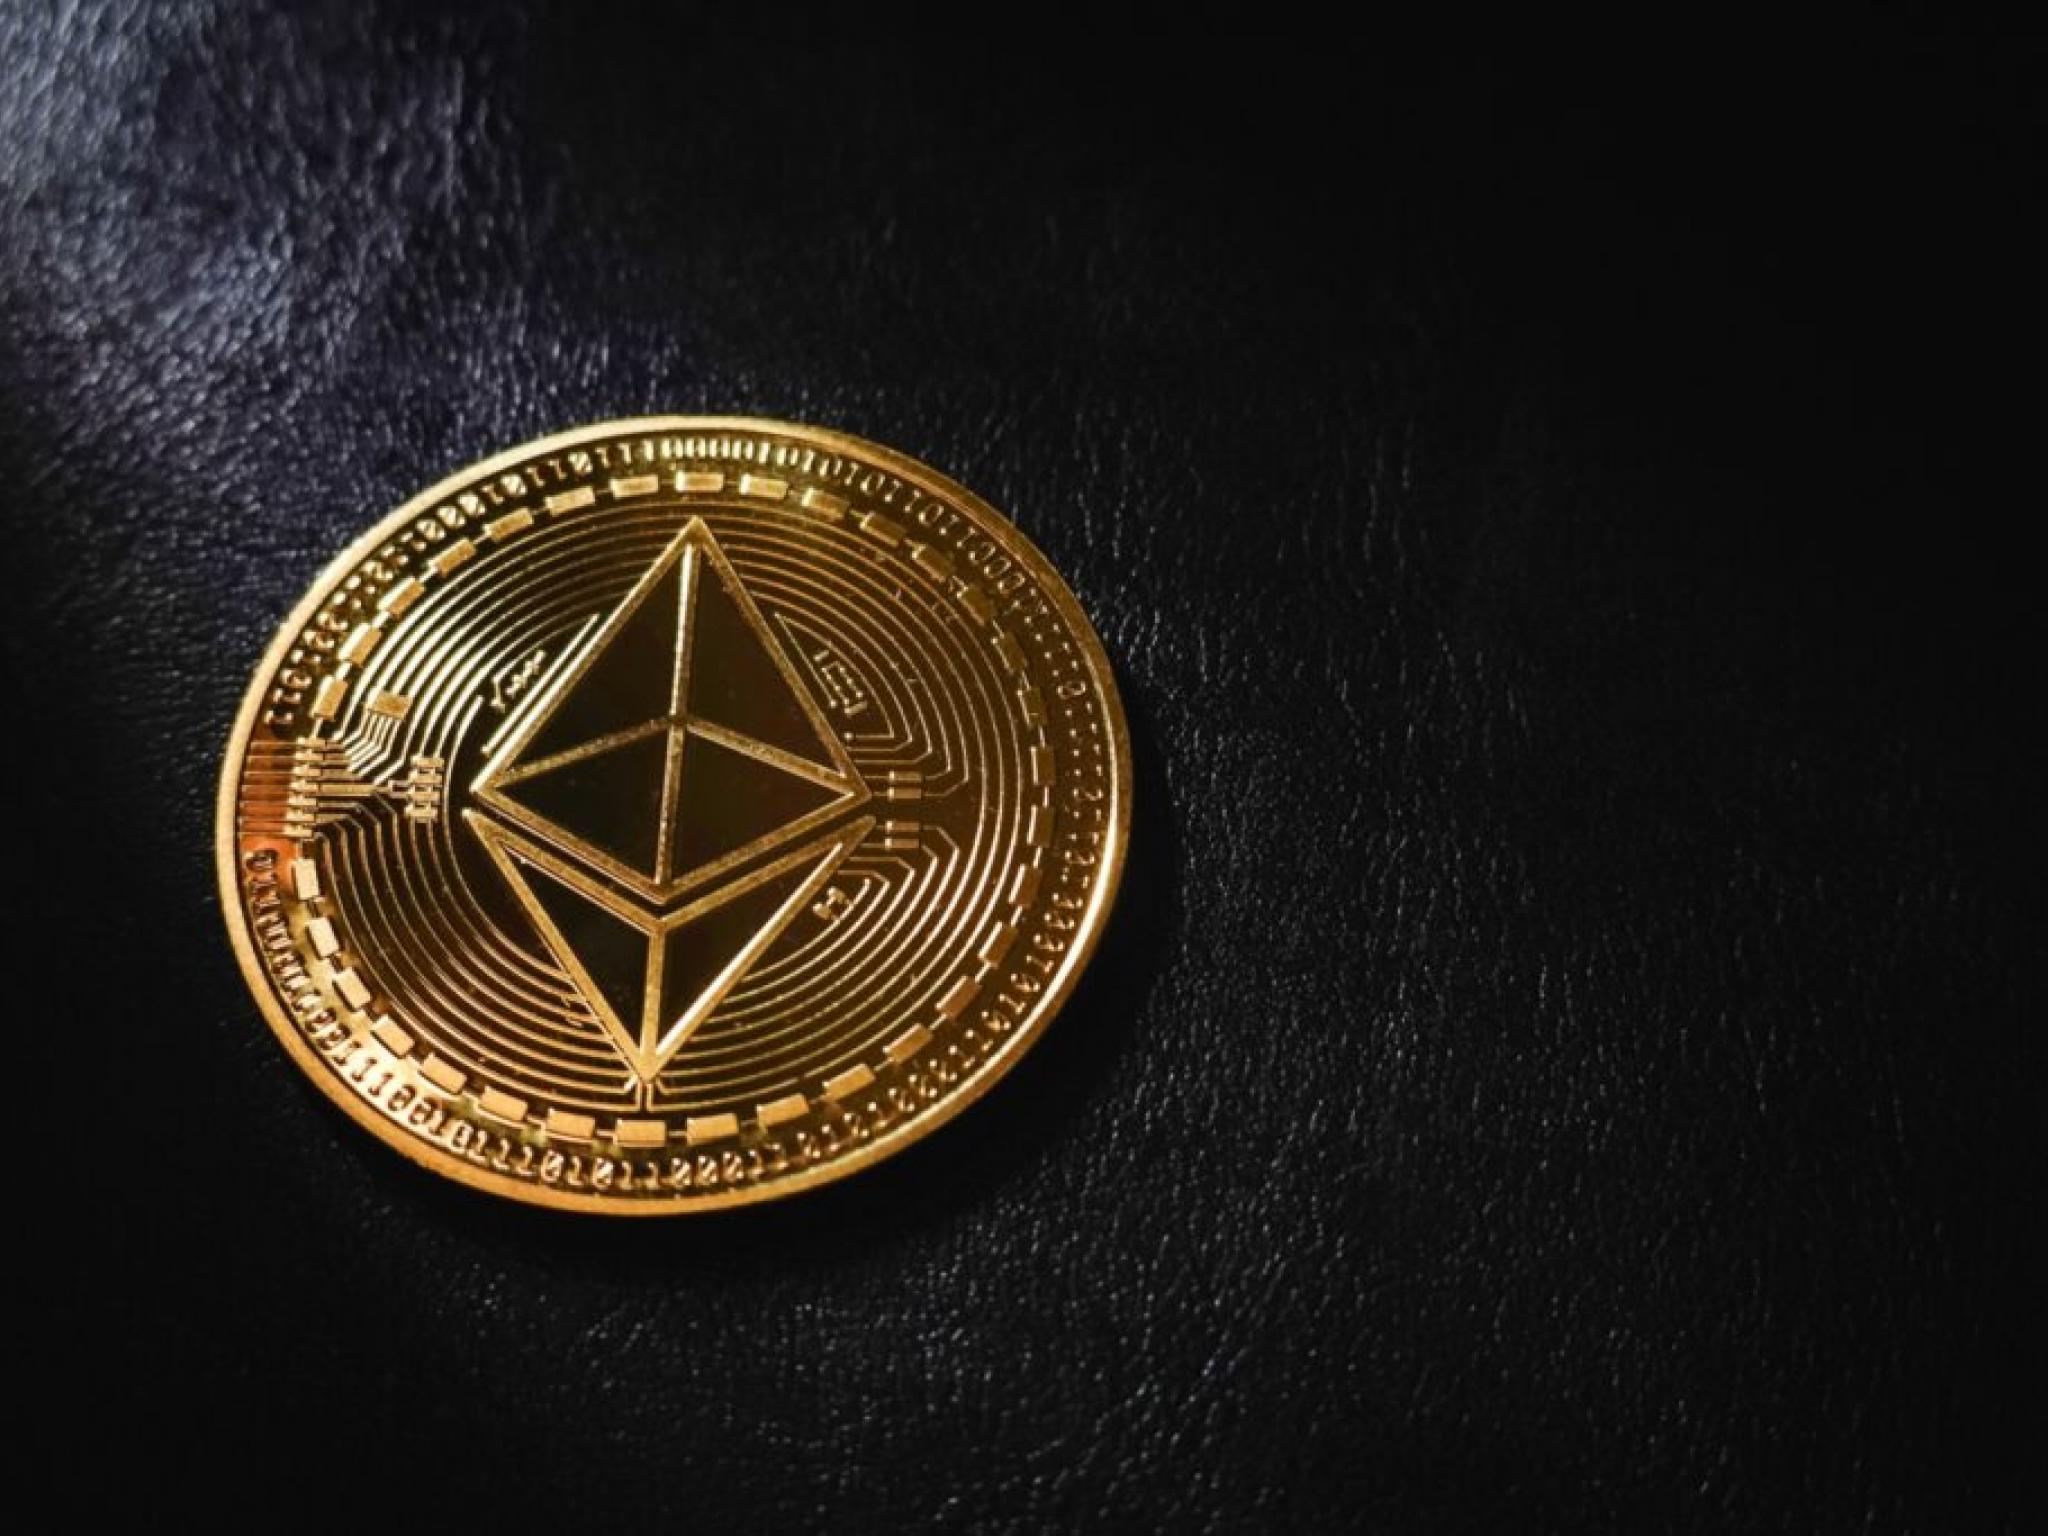  ethereum-etf-decision-looms-what-to-watch-out-for-today 